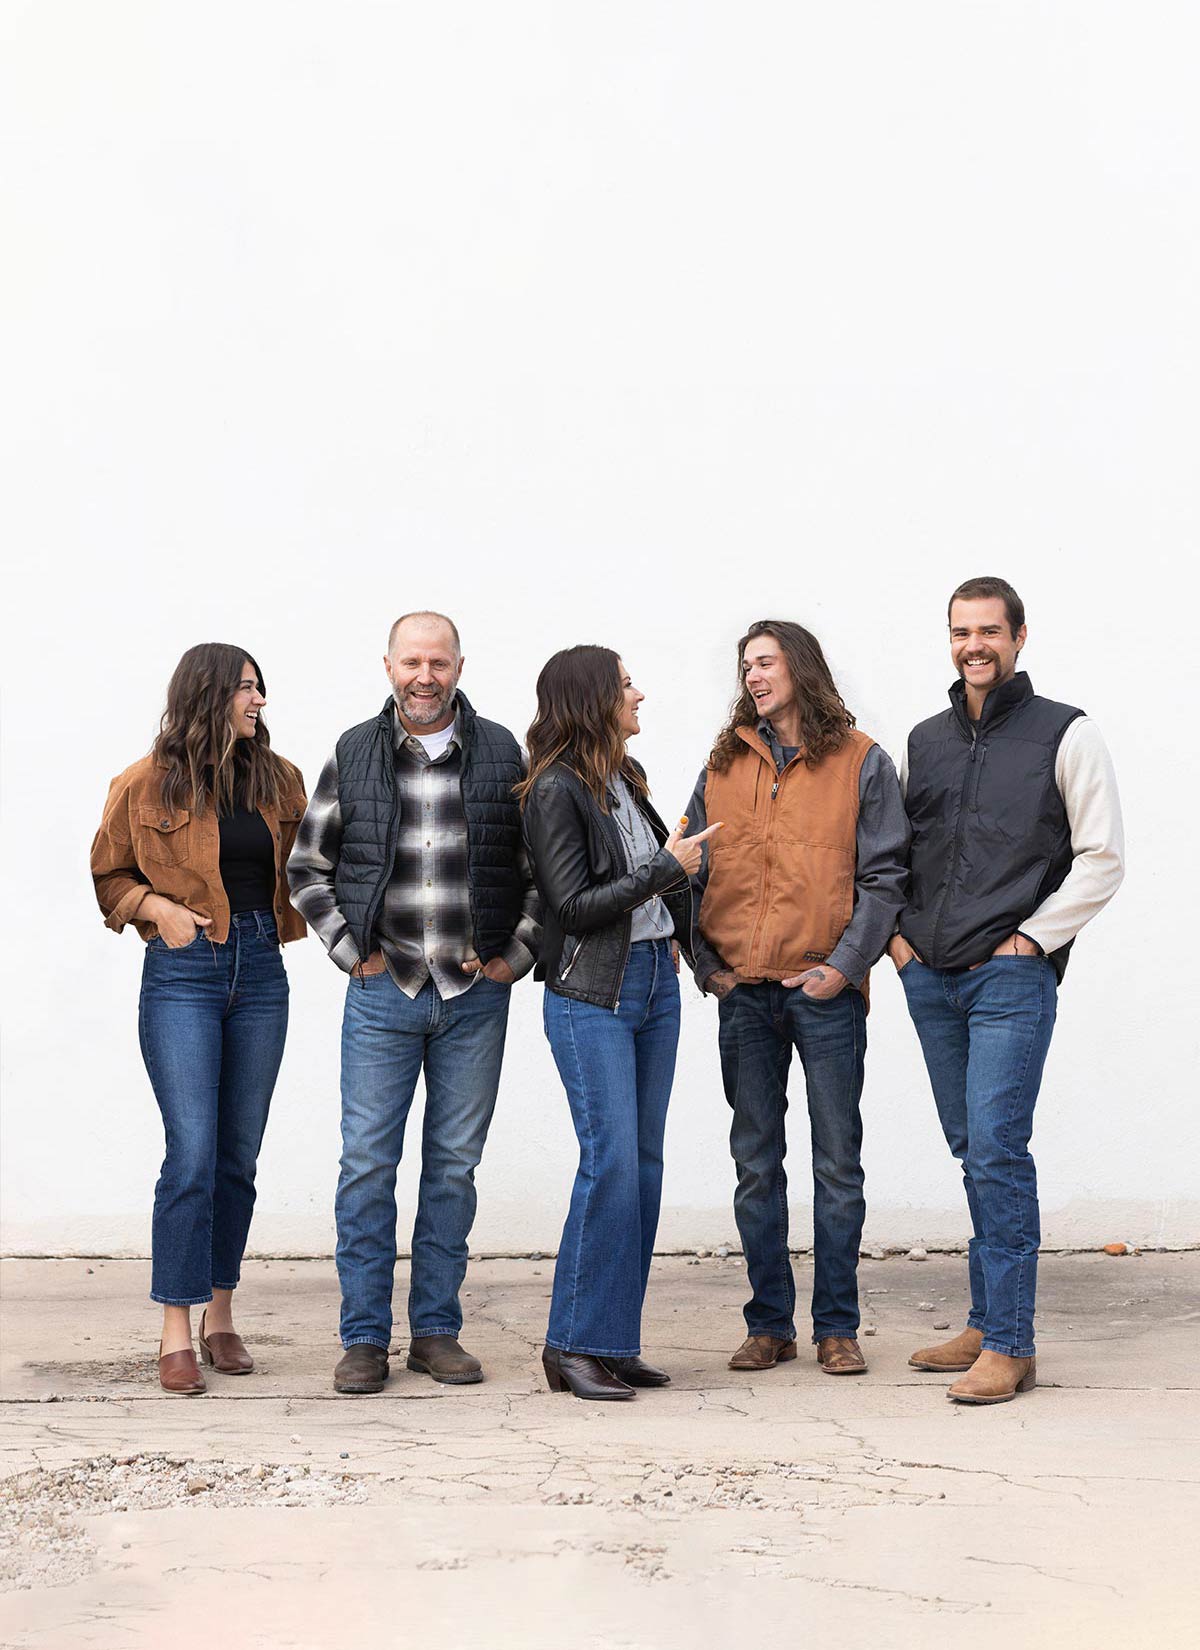 The Freestone Design-Build team stands in front of white wall in Old Town Fort Collins with on-brand outfits and they are all laughing and talking with each other